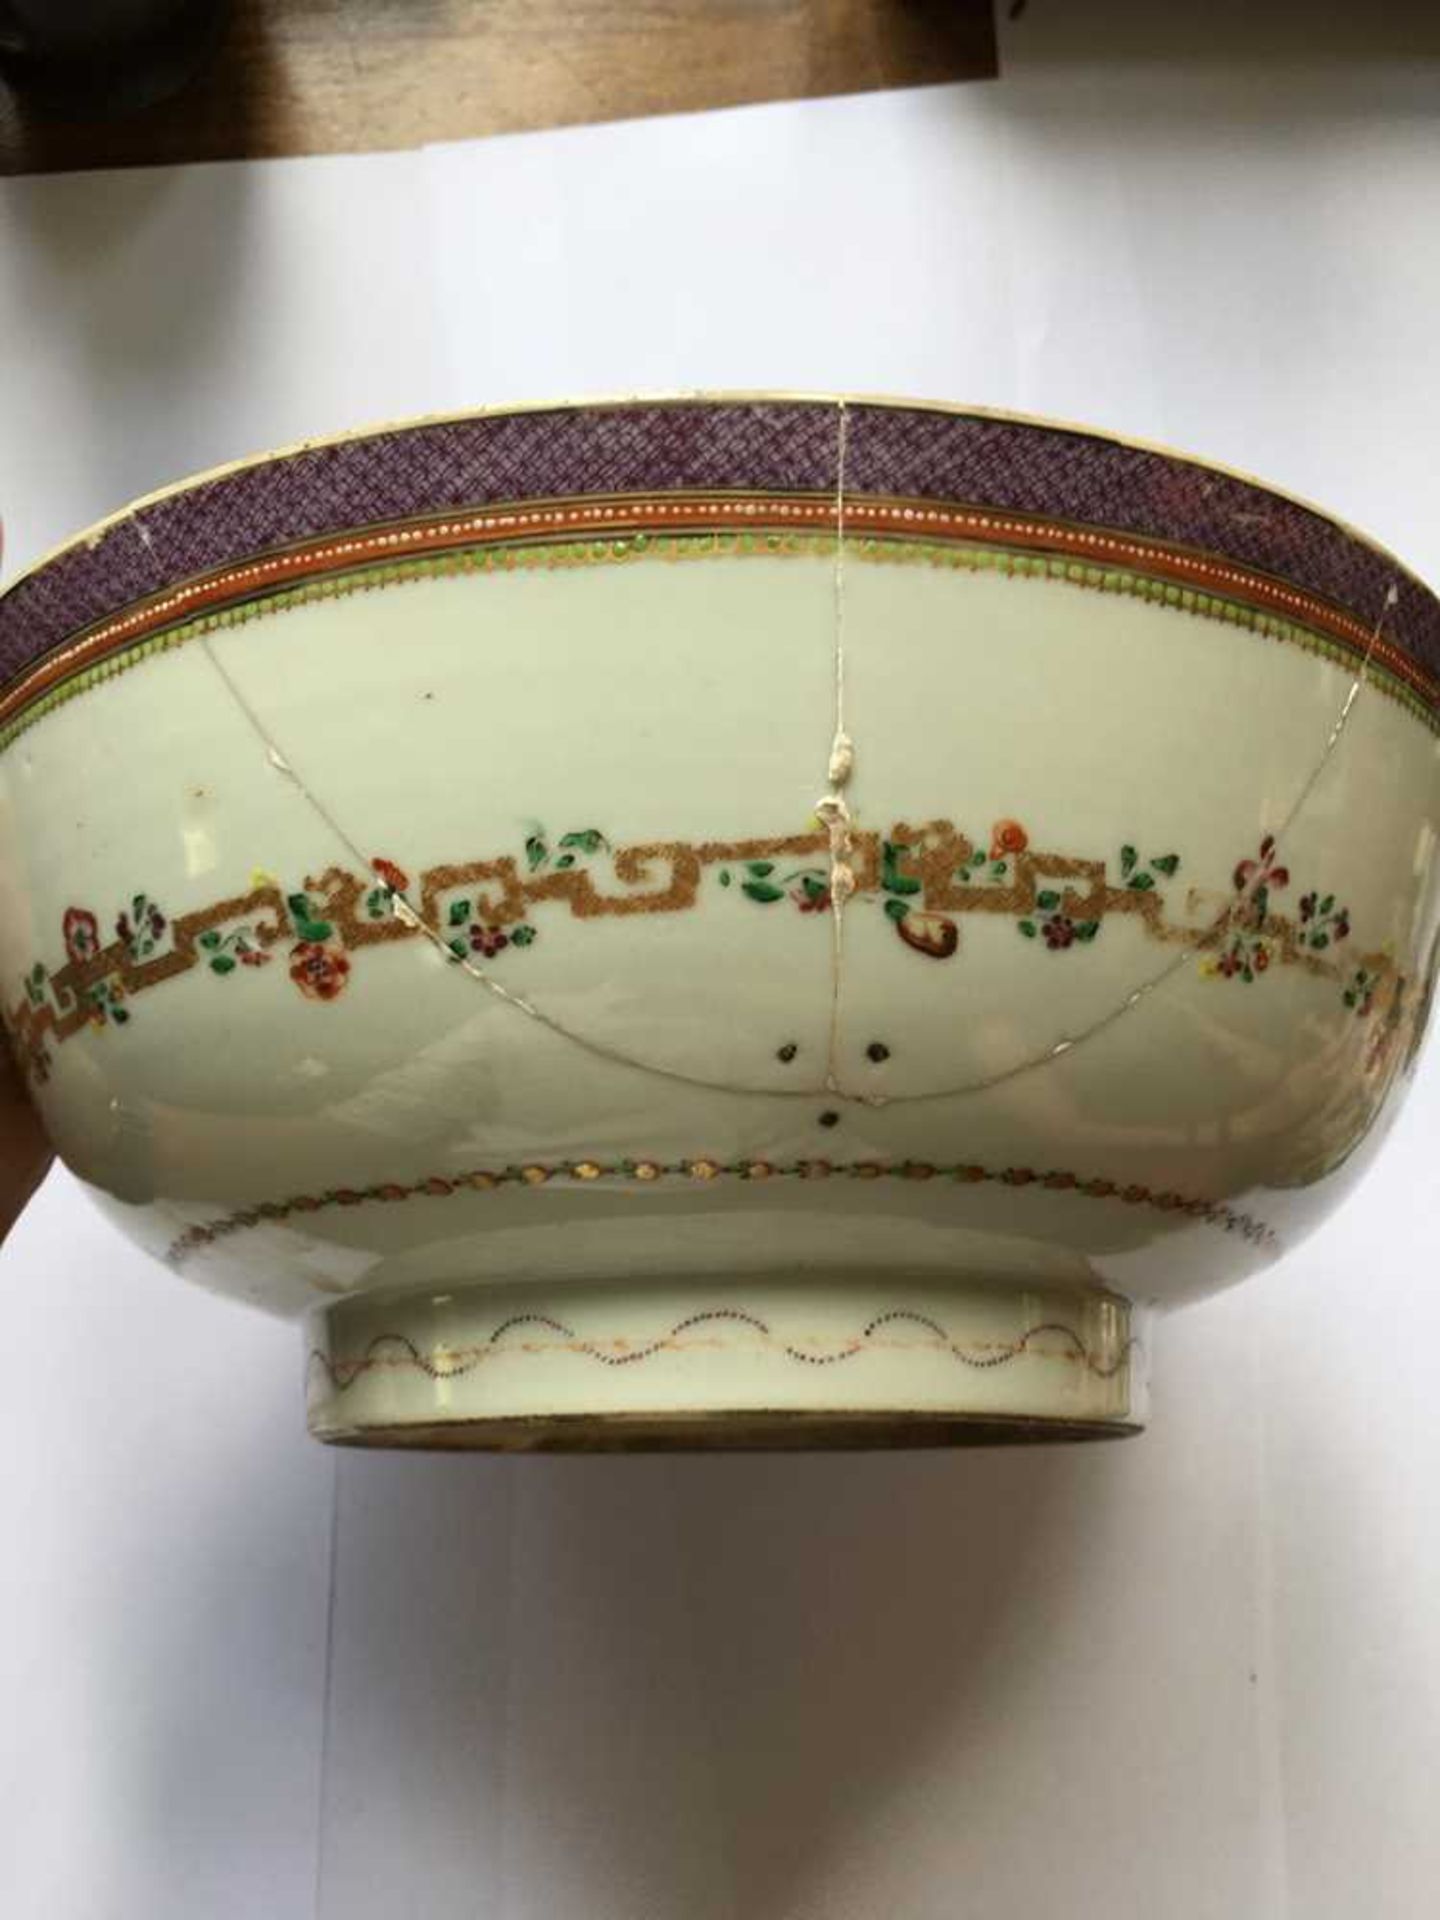 TWO CHINESE EXPORT PORCELAIN PUNCH BOWLS QING DYNASTY, LATE 18TH/19TH CENTURY - Image 9 of 33